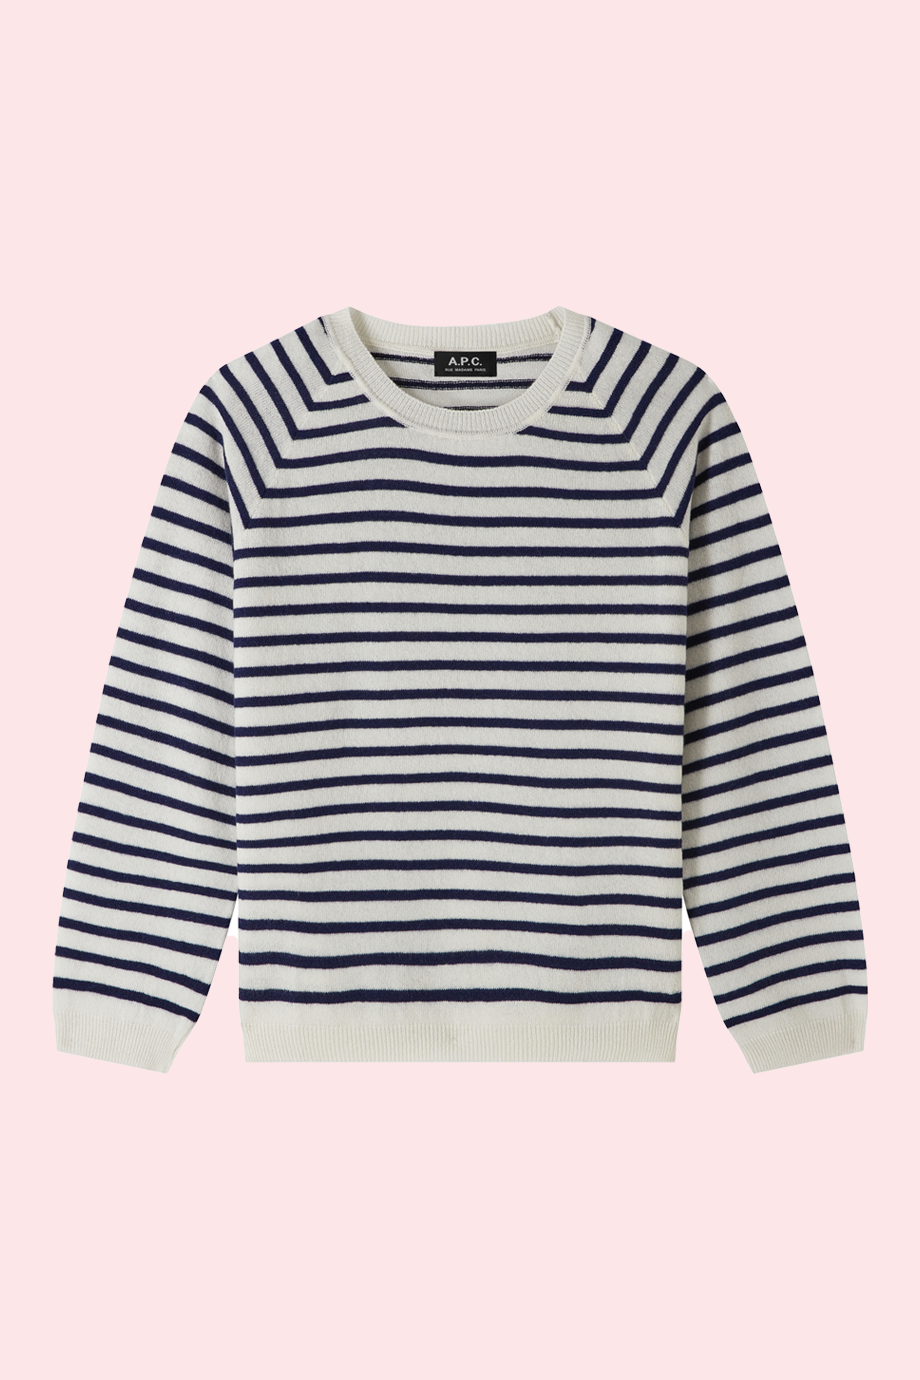 A.P.C. sweater Lilas white/dark navy product